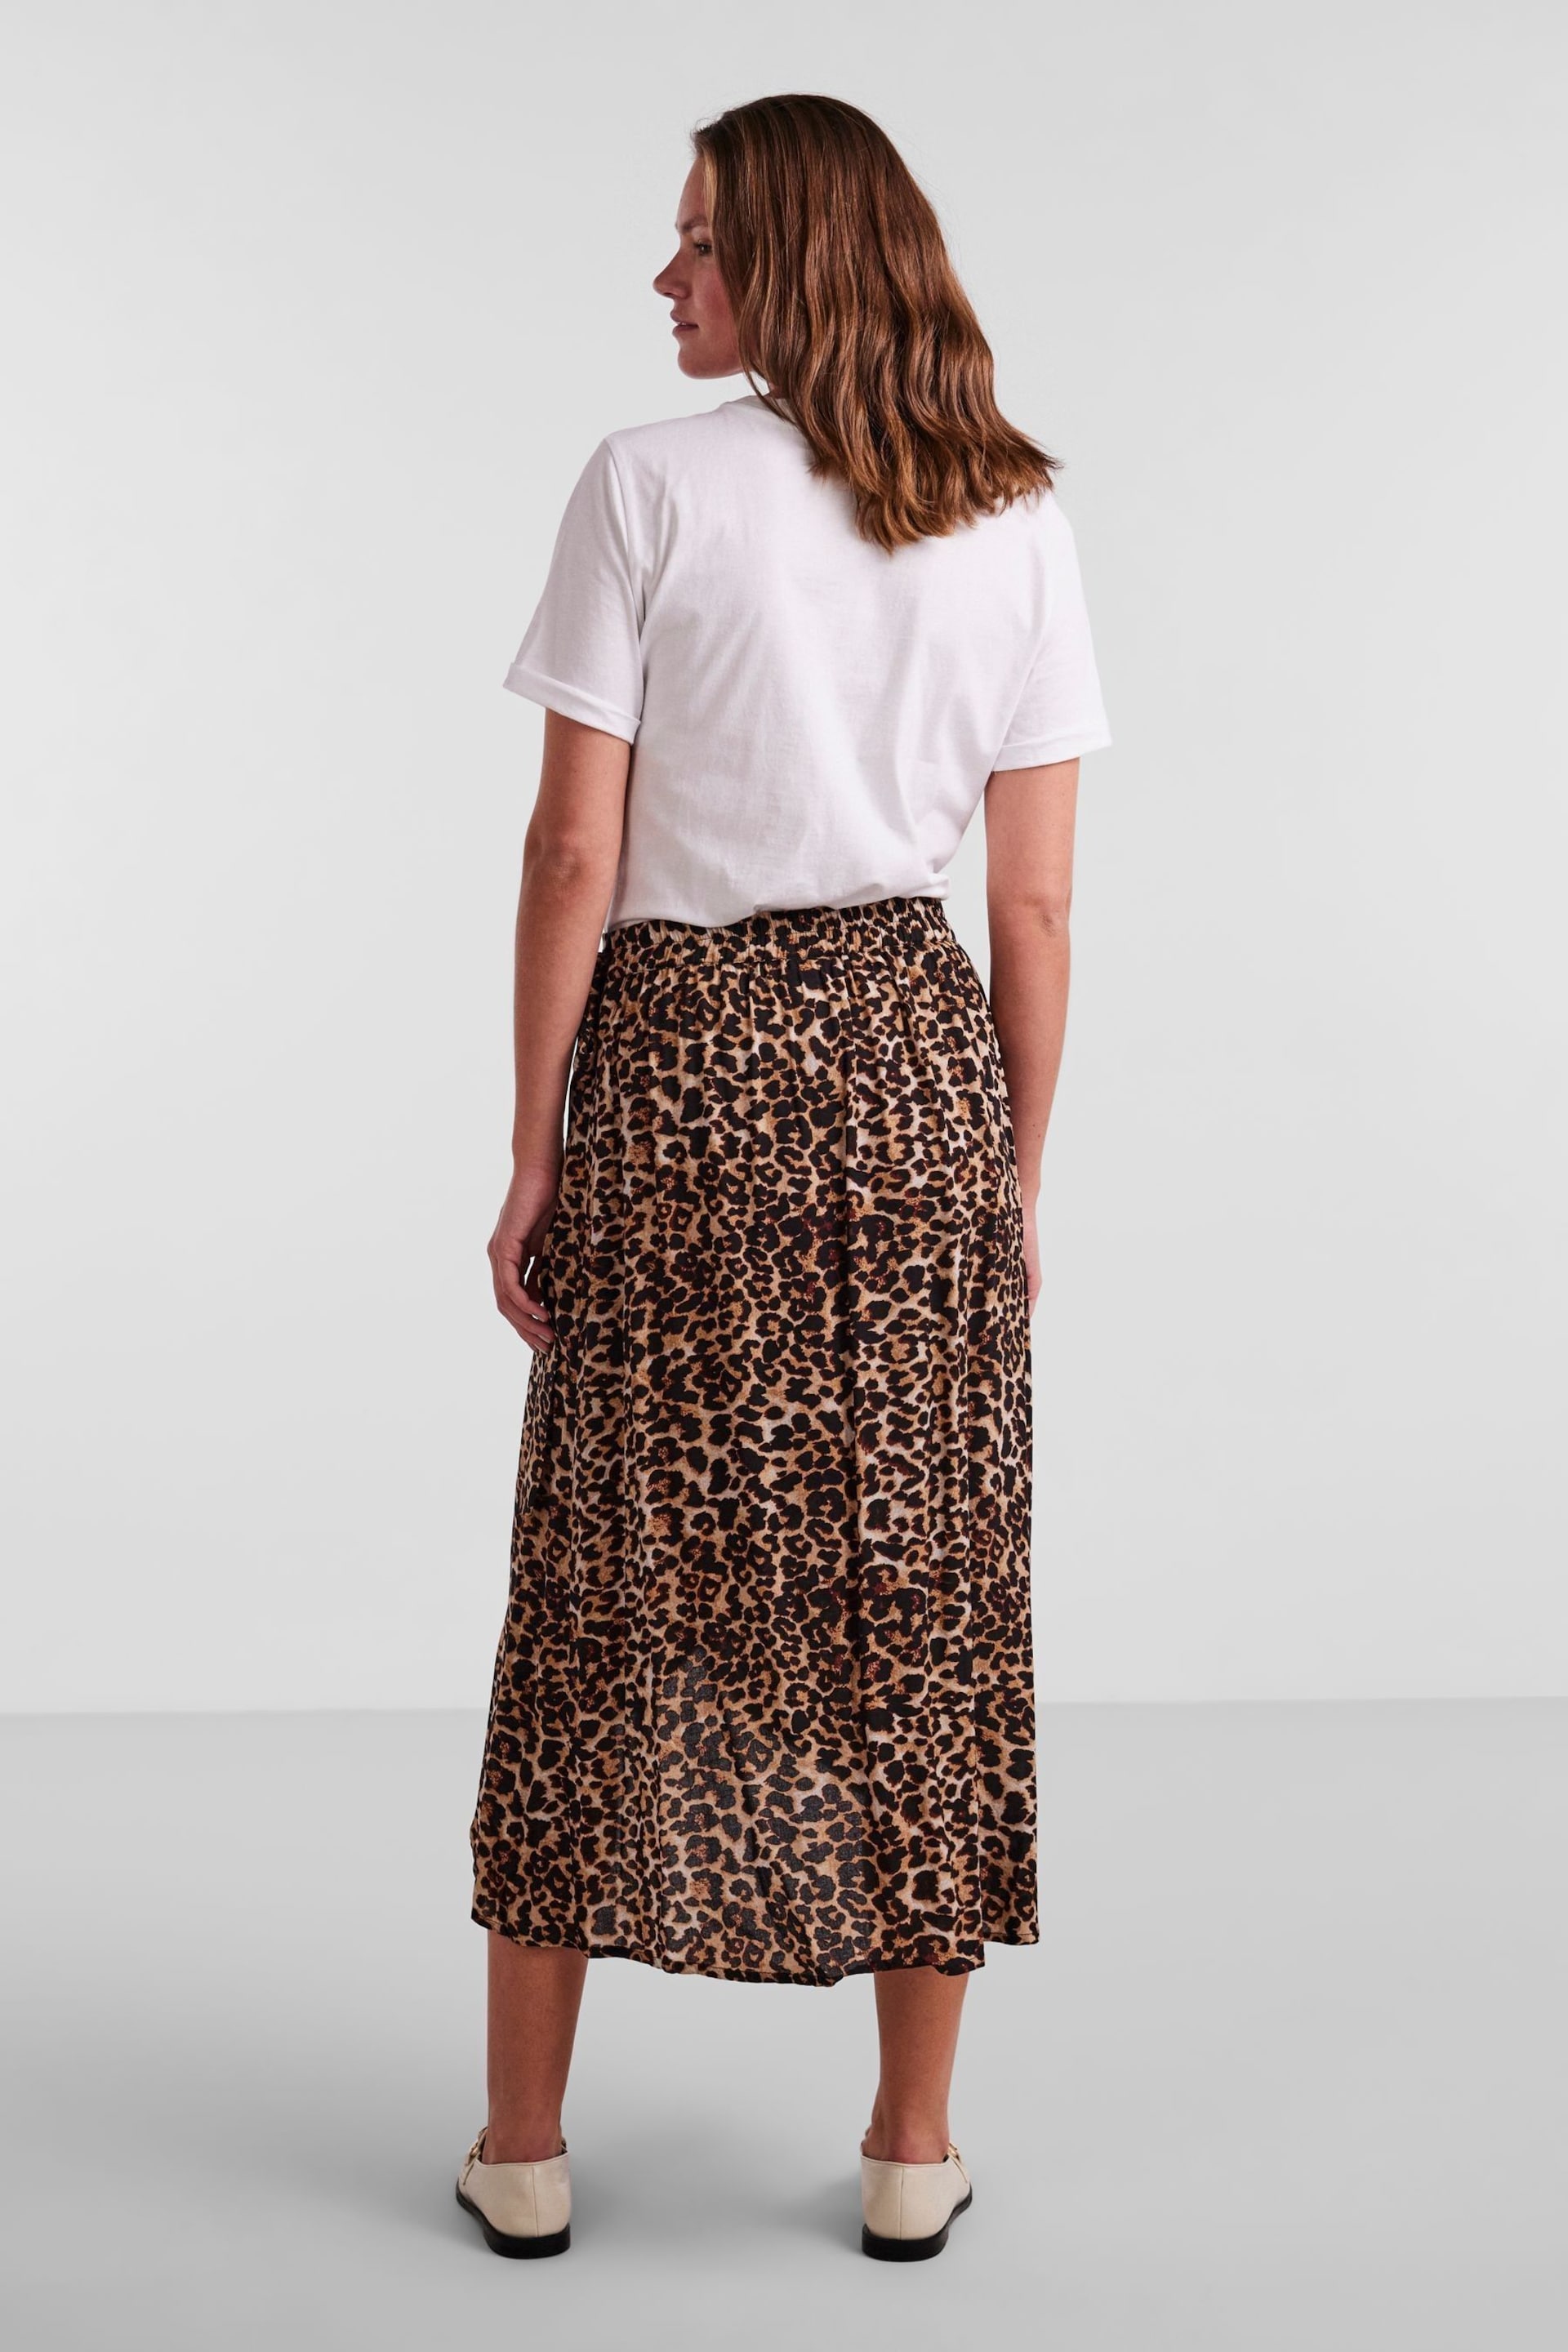 PIECES Leopard Print Printed Midi Wrap Skirt - Image 3 of 5